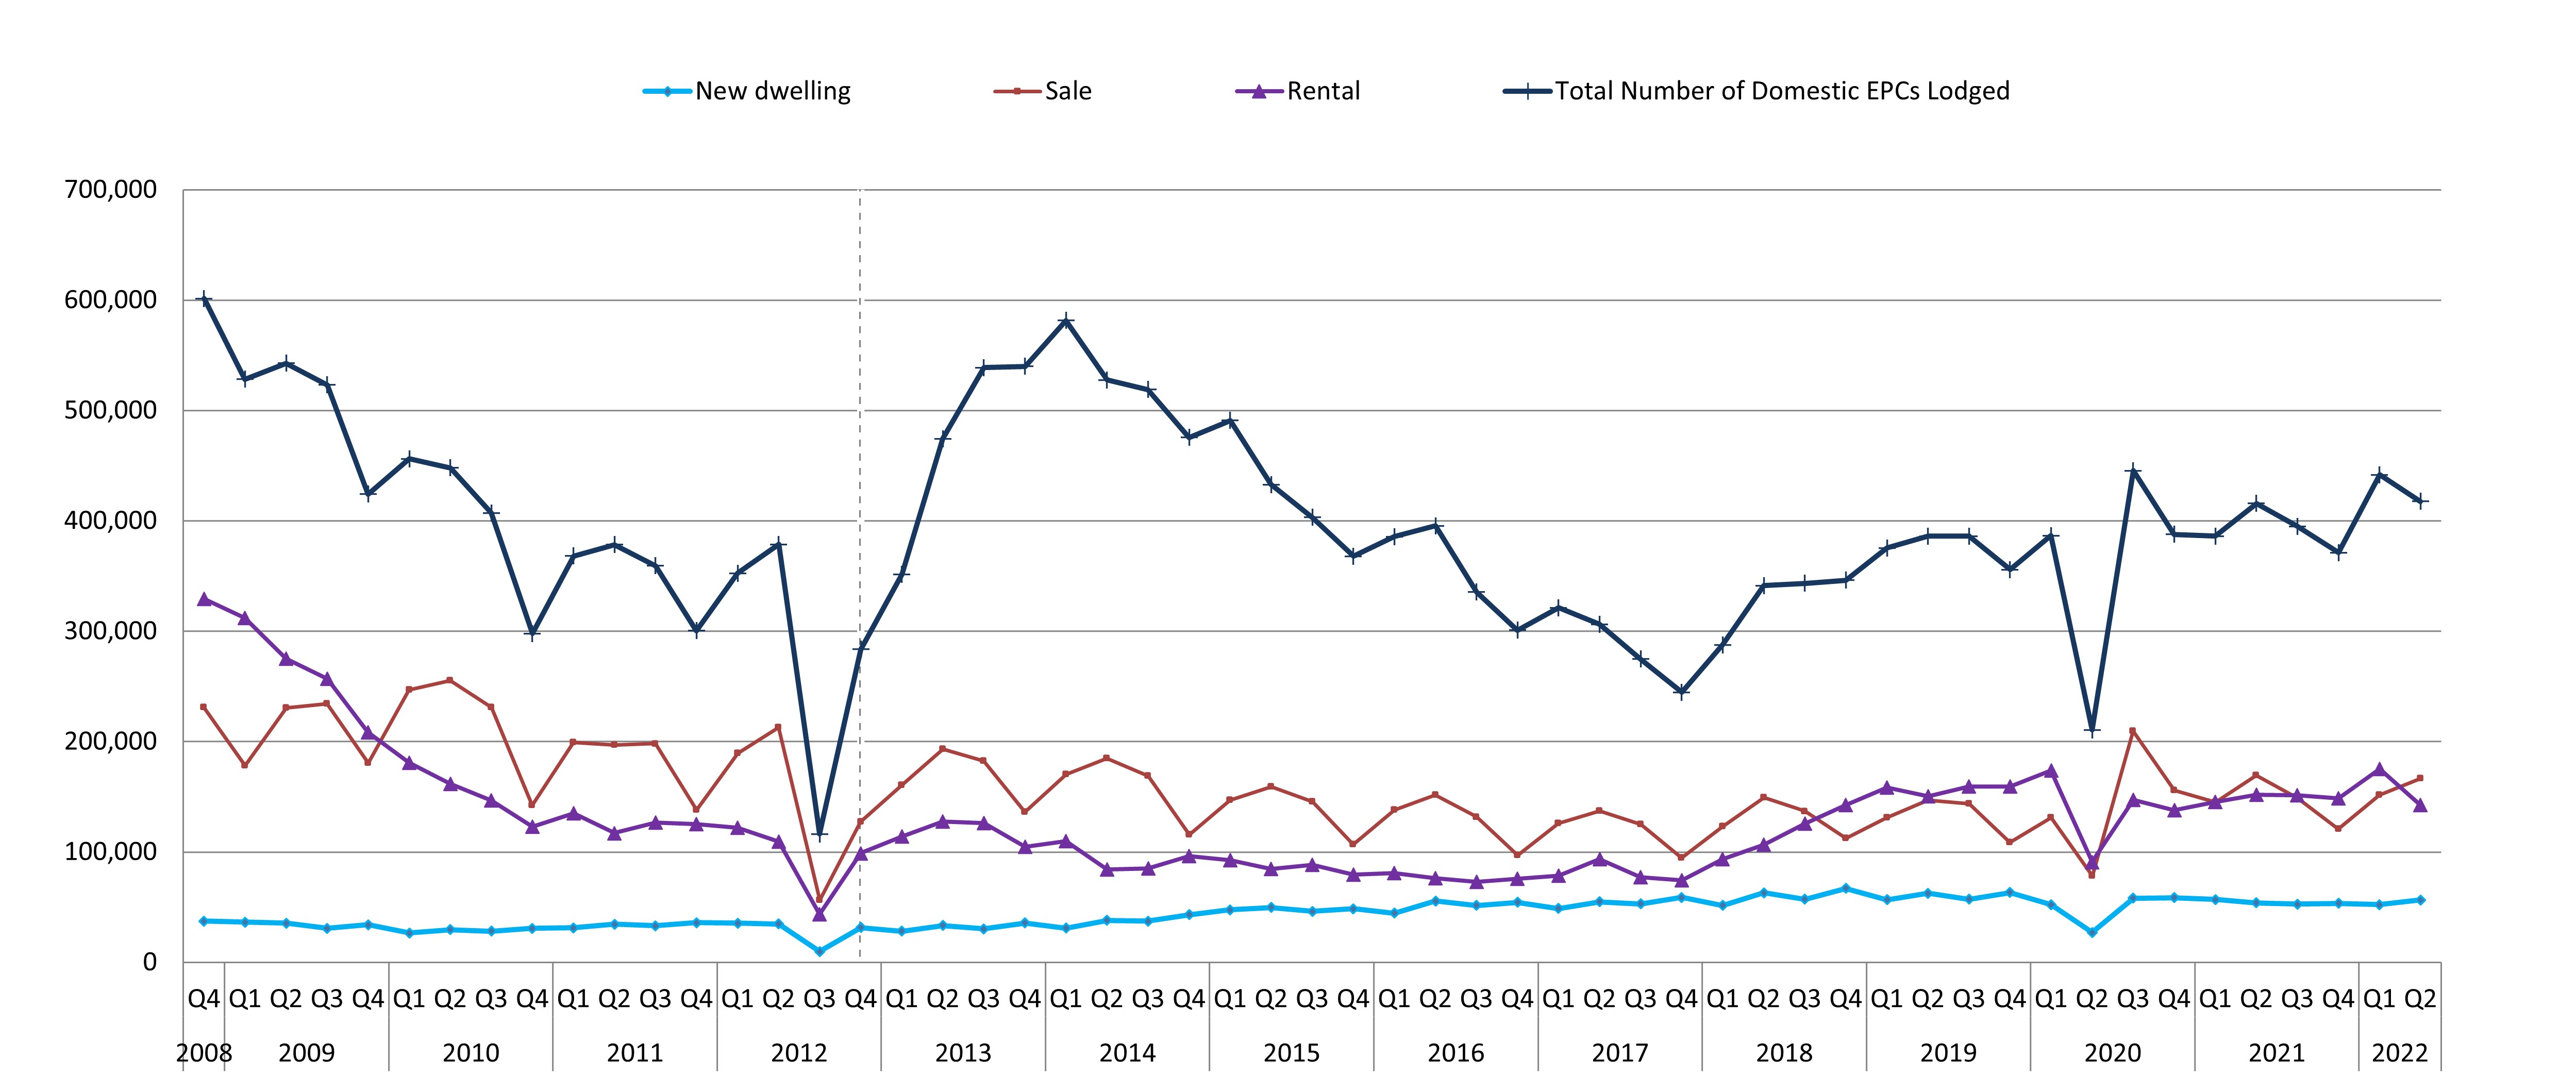 Line chart of the number of domestic EPCs by transaction type for new dwellings, marketed sales and rentals over time from 2008 to June 2022, for England 